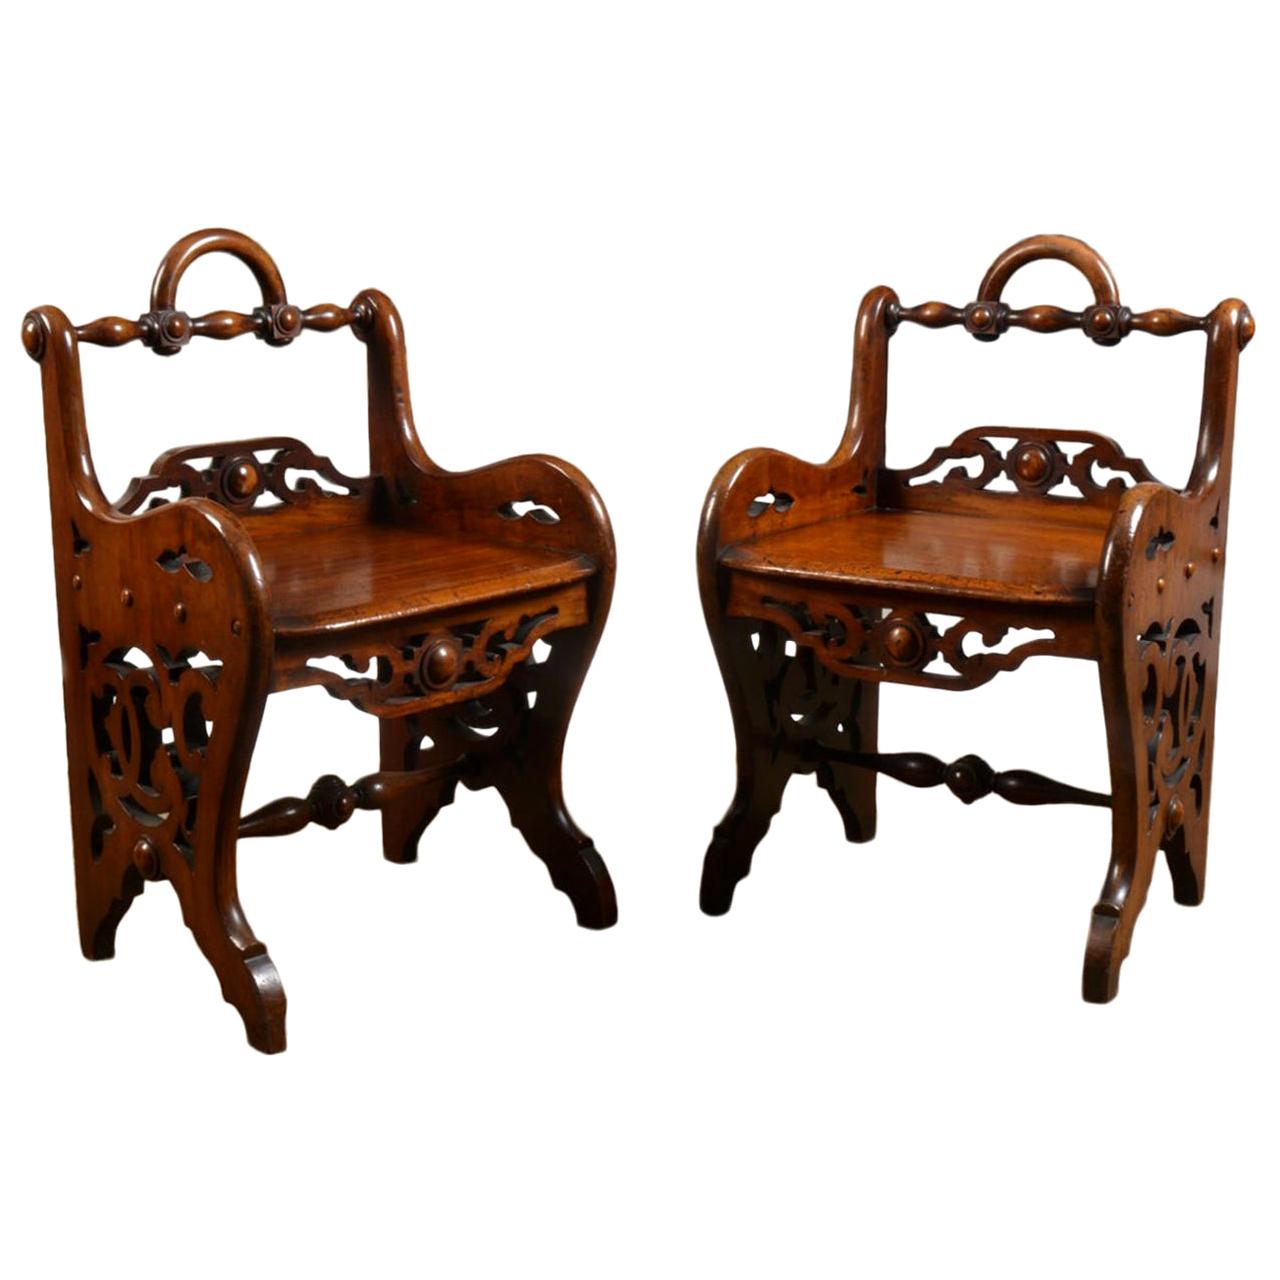 Pair of Early Victorian Mahogany Hall Chairs in the Manner of Richard Bridgens